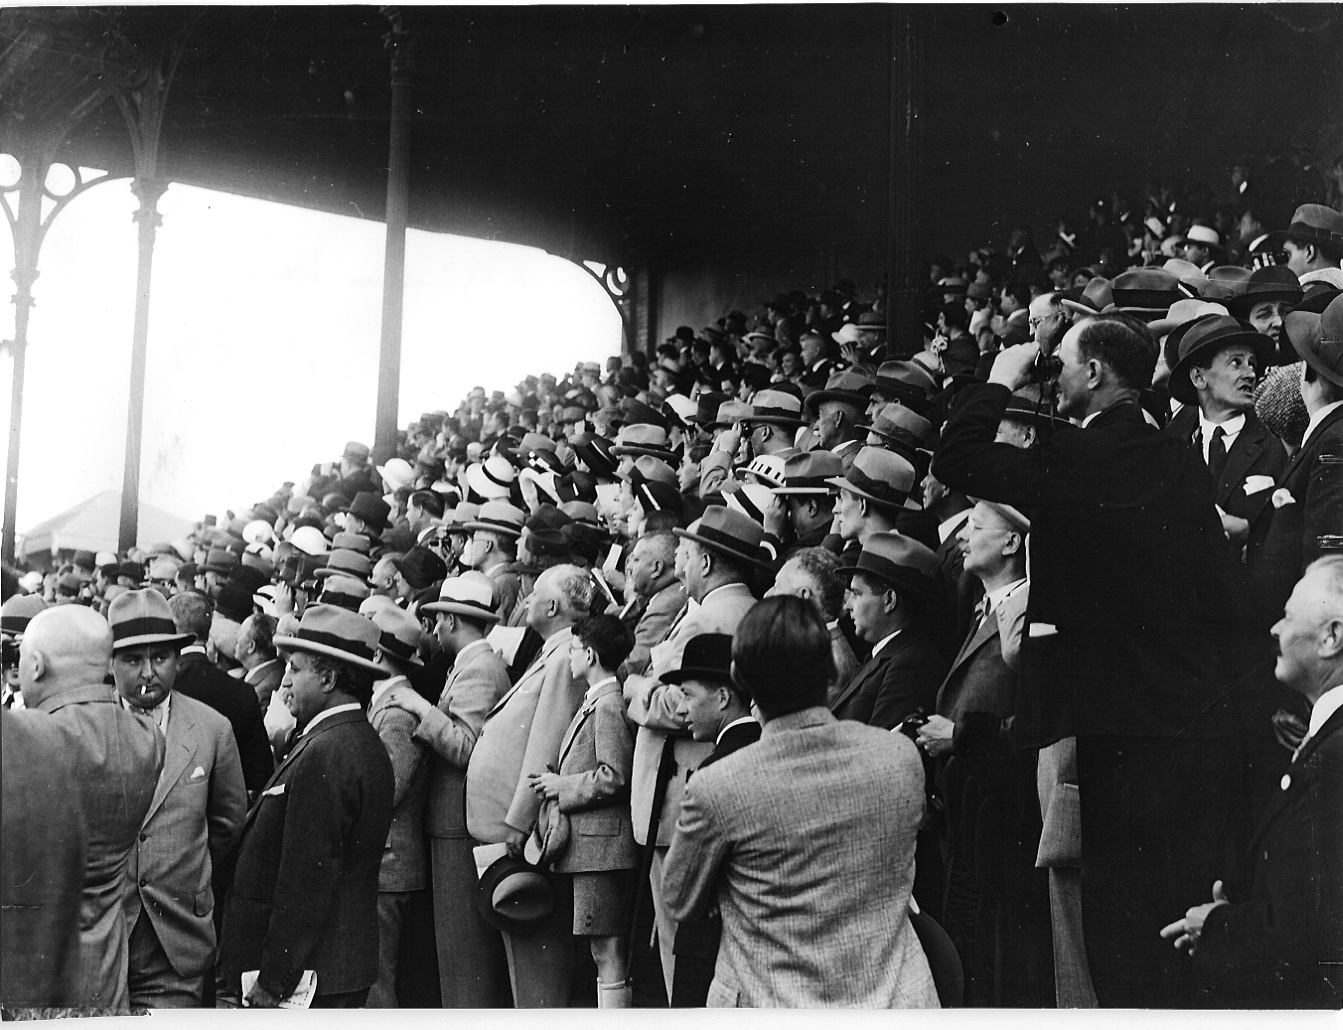 Racing in Austria has a long and glorious past: here a vast crowd is enthralled by the action at Freudenau races. Photo: National Library of Austria